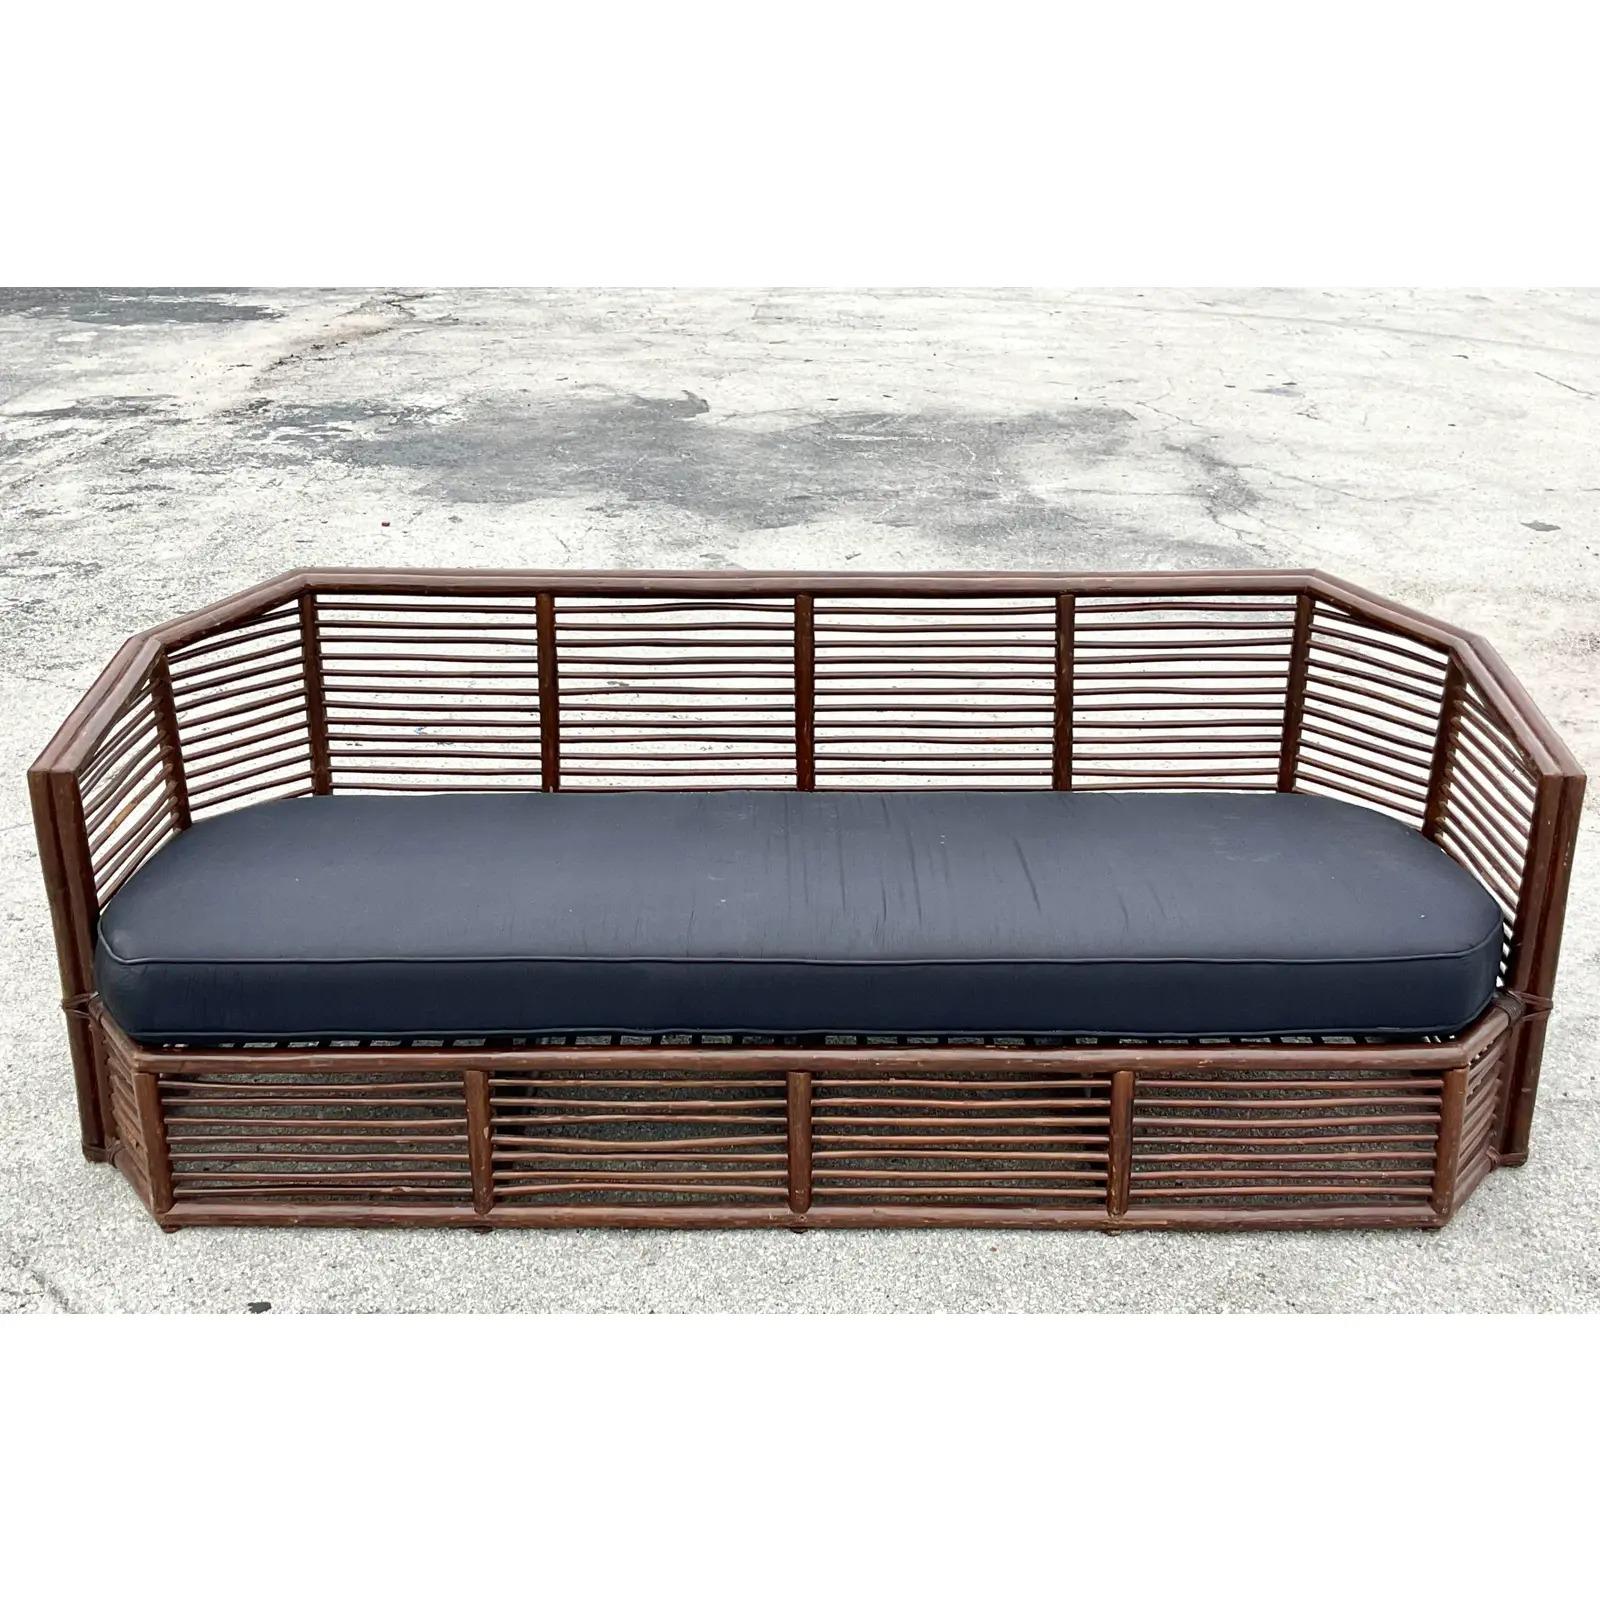 Fantastic vintage Coastal sofa. Beautiful stacked rattan in a chic angular design. A stunning profile. Acquired from a Palm Beach estate.